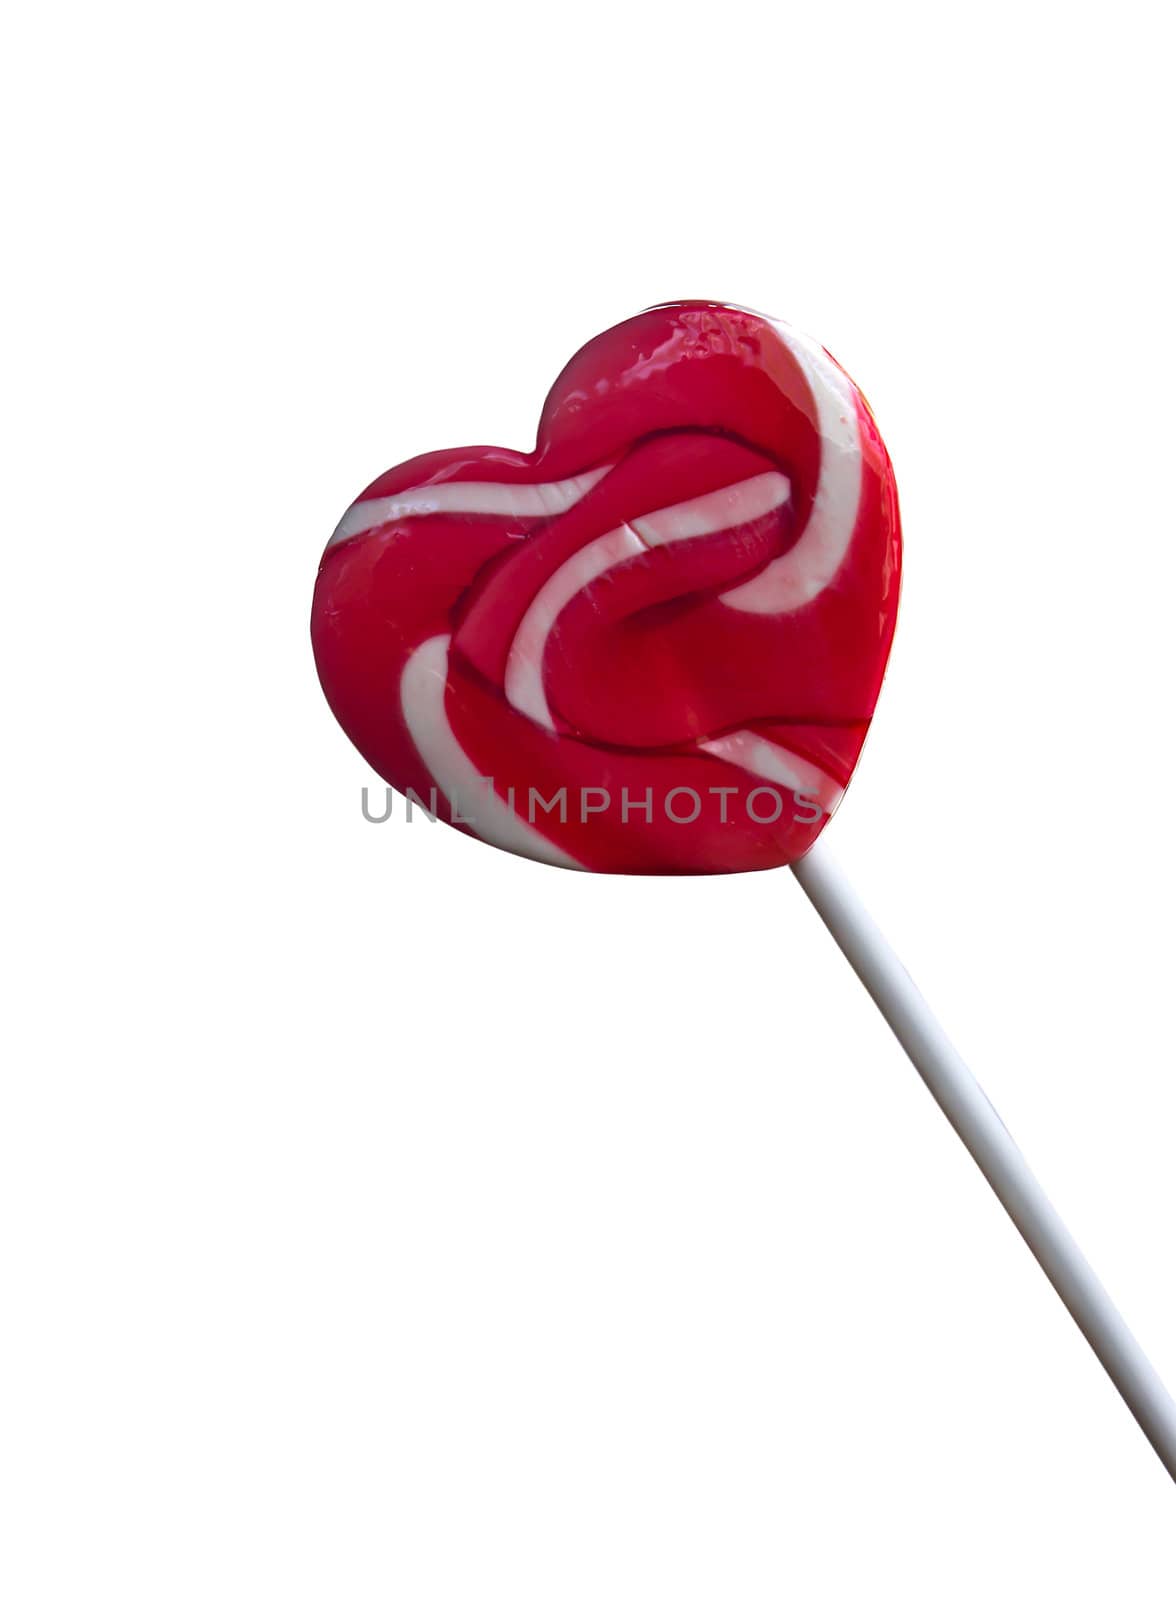 Candy heart on a stick isolated on a white background